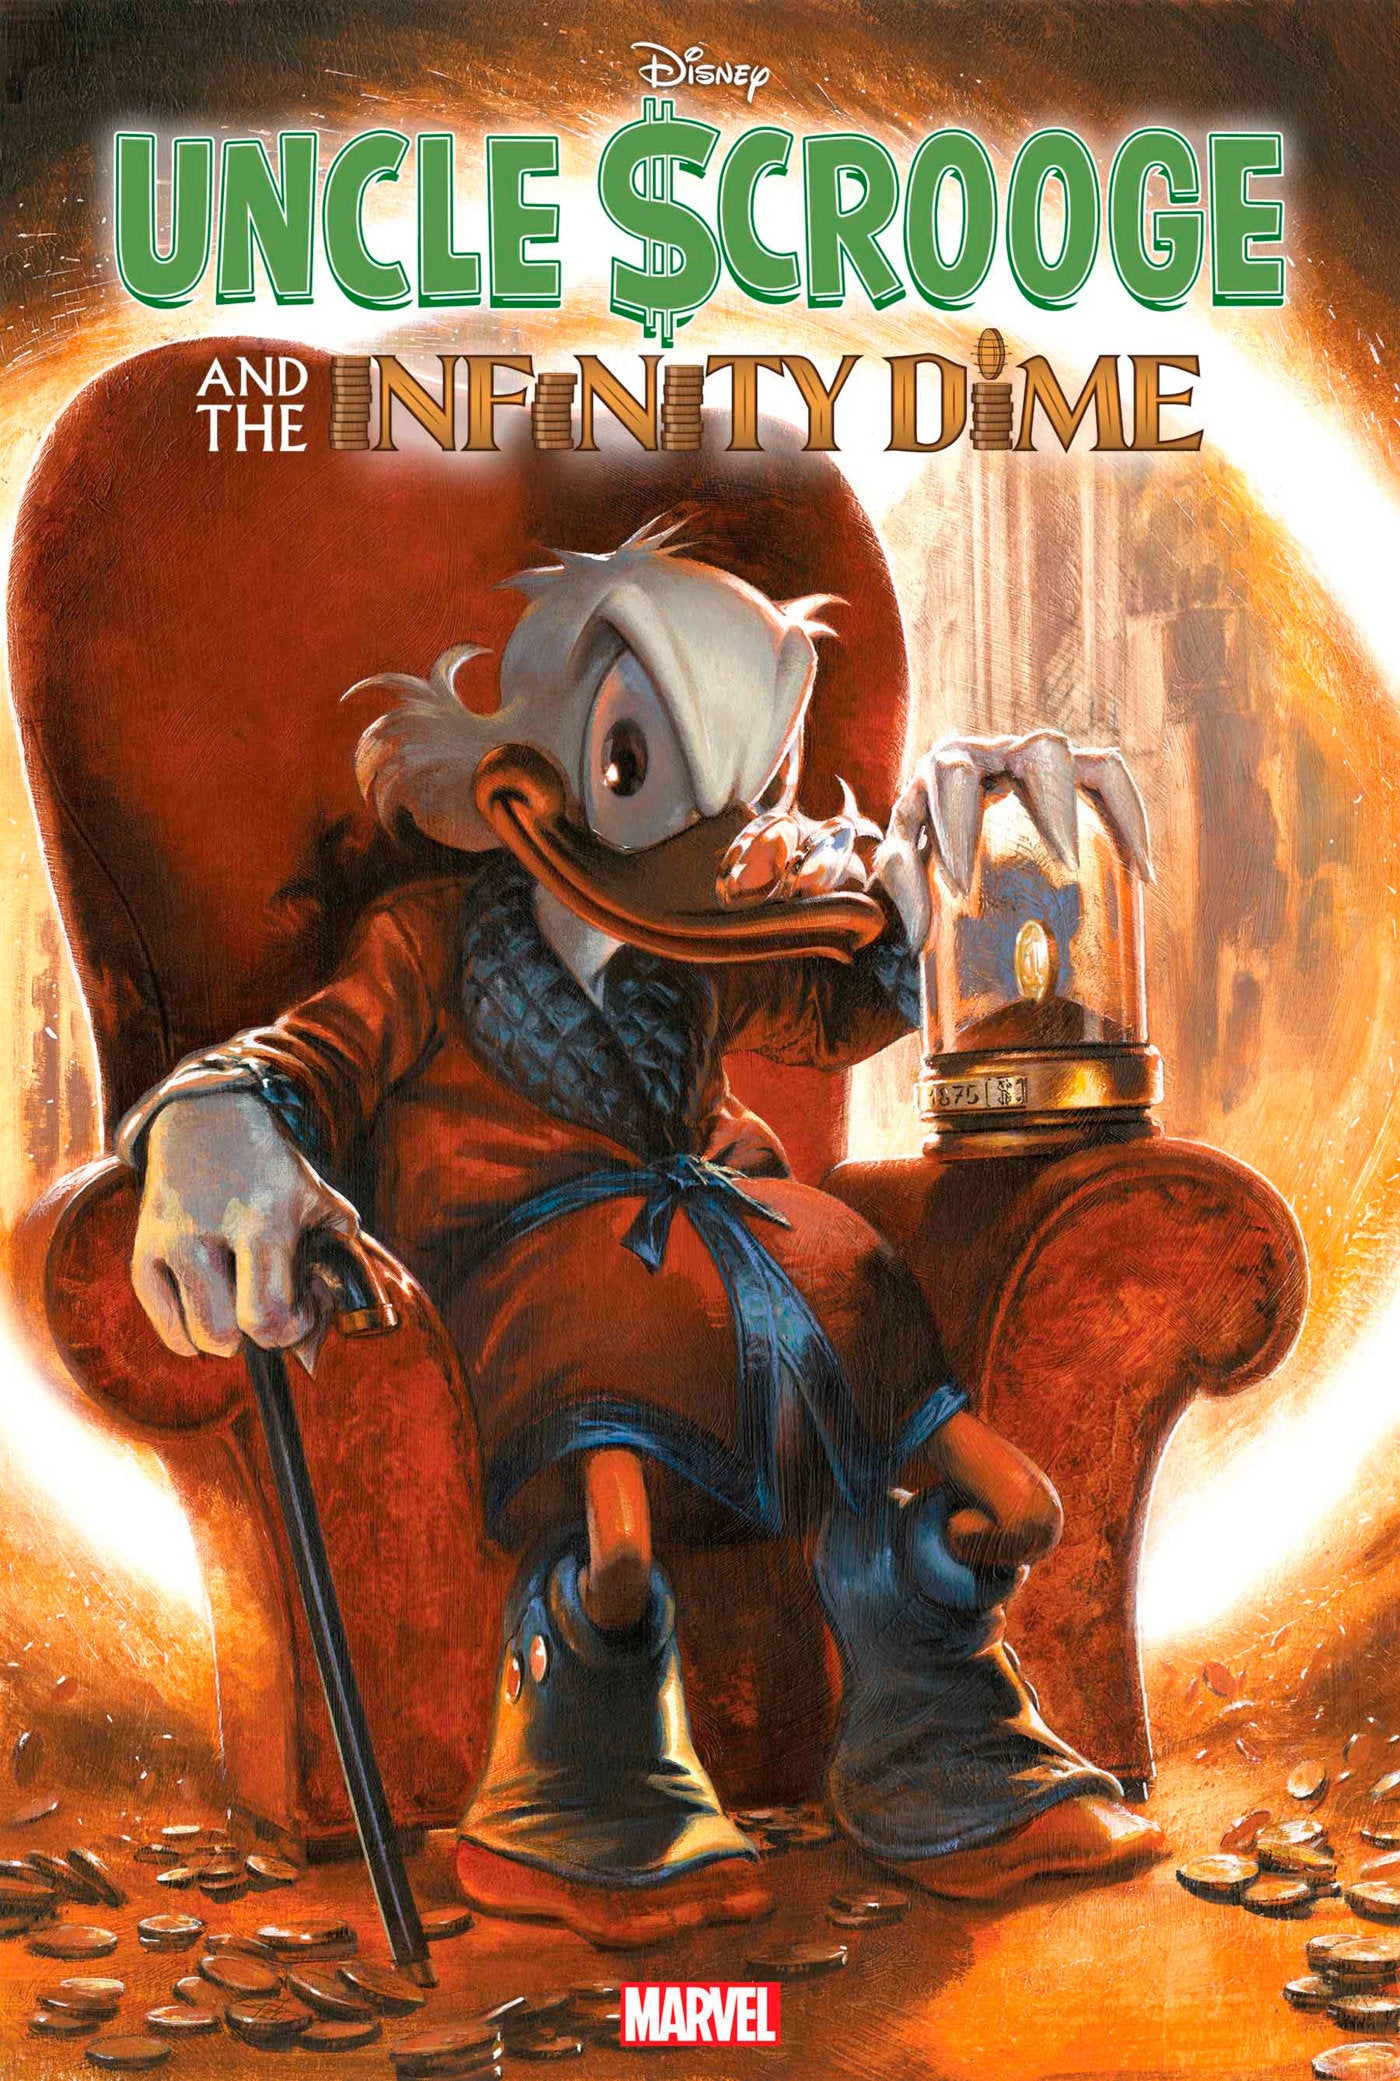 UNCLE SCROOGE AND THE INFINITY DIME #1 GABRIELE DELL'OTTO VARIANT